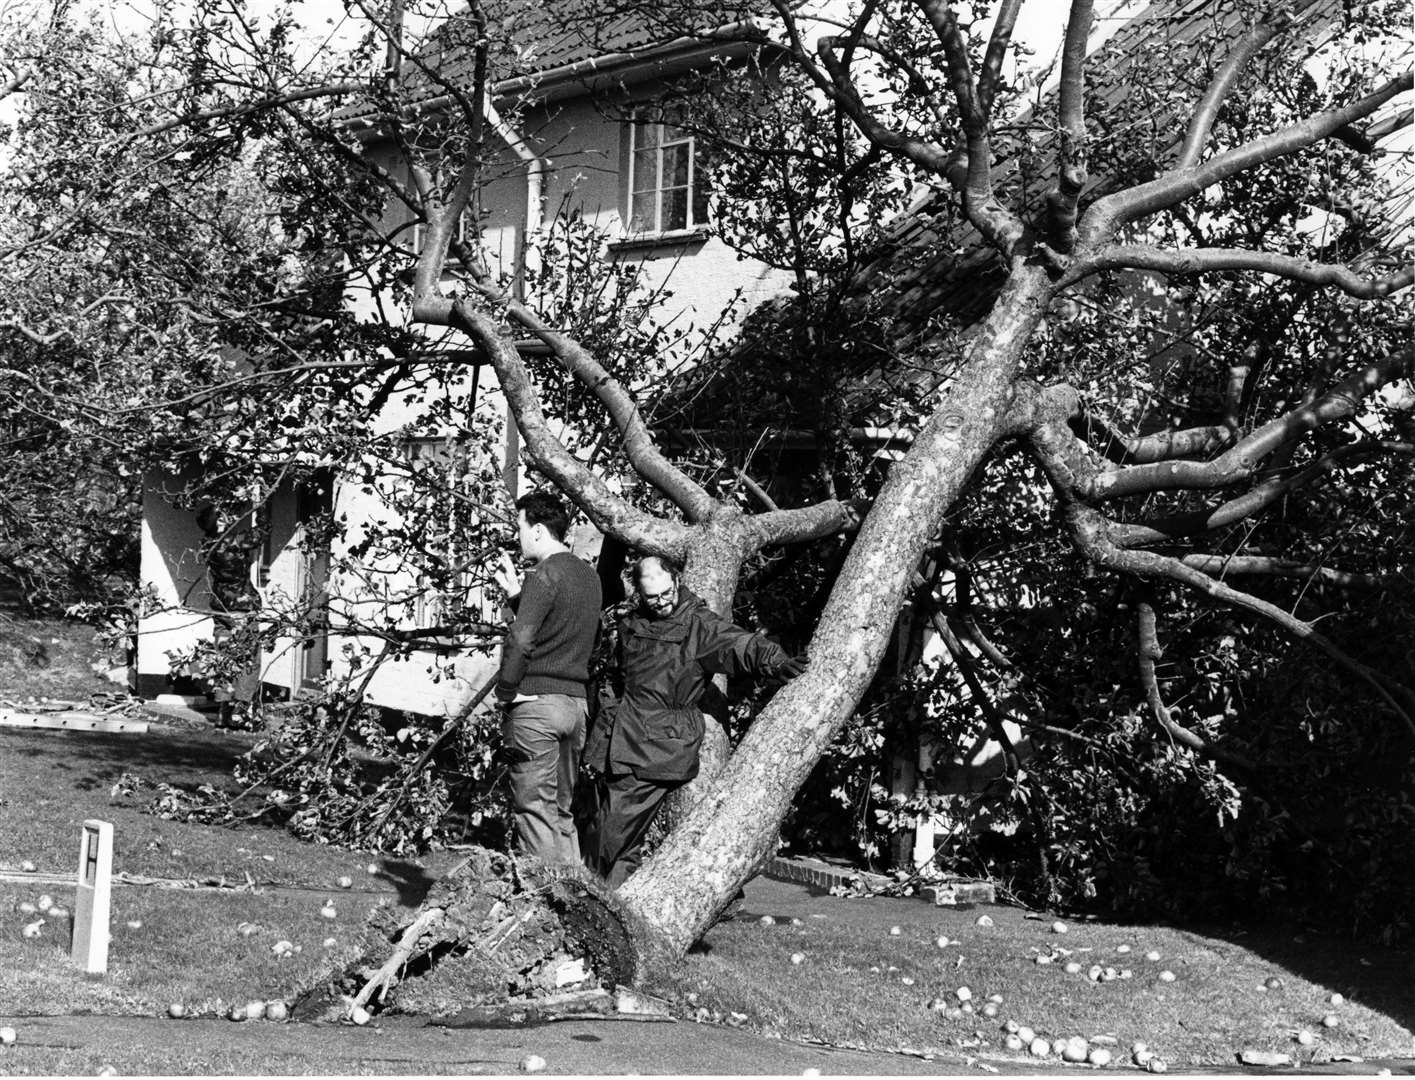 Residents survey the damage in Orchard Drive after the Great Storm in October 1987